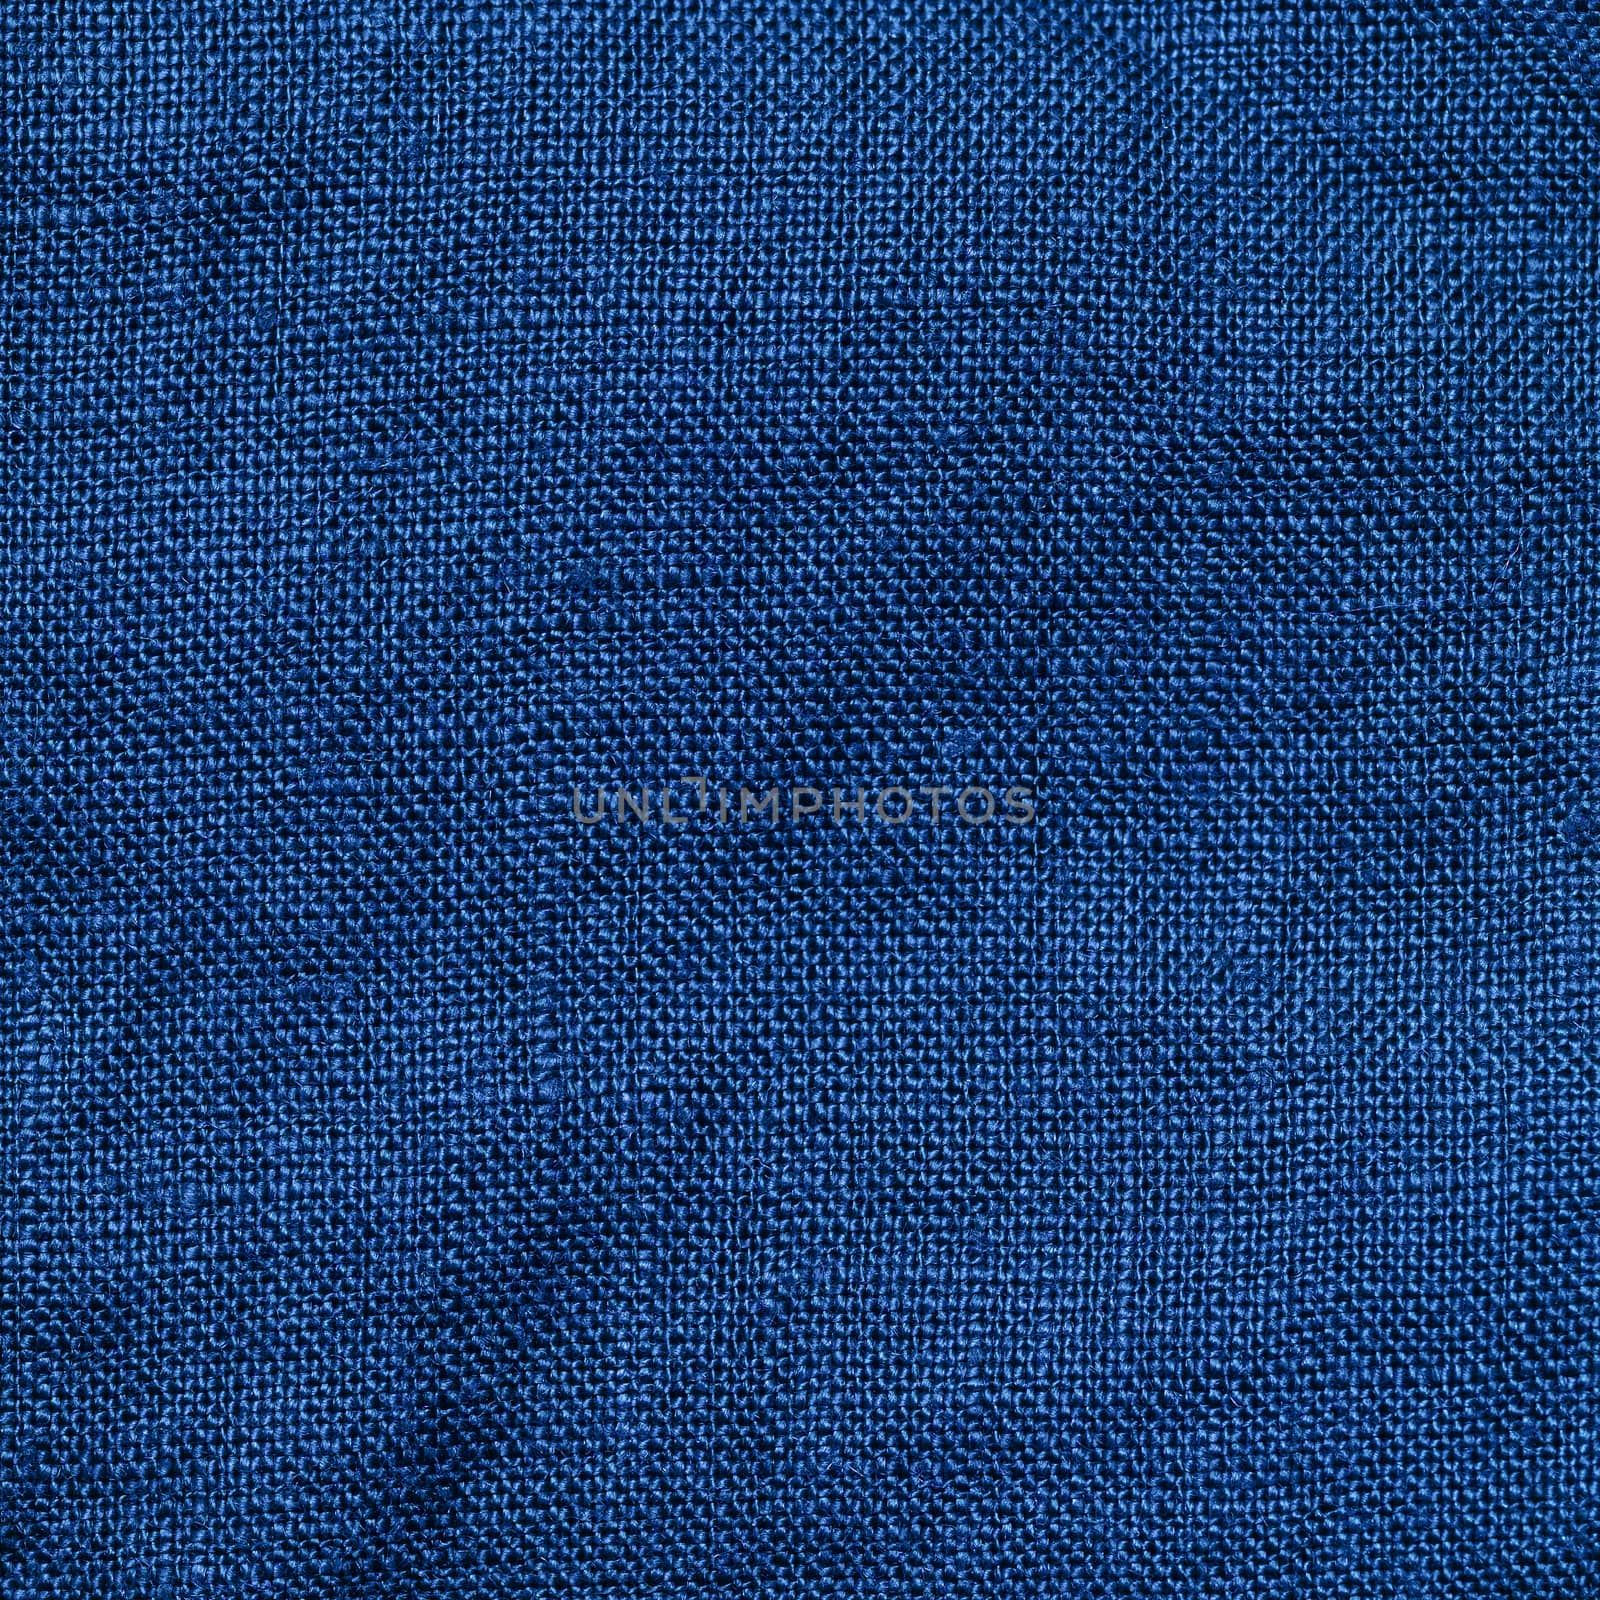 Abstract extreme close up linen textured background made of classic blue 2020 color. Color of year 2020 linen textile backdrop. COY2020 concept. Copy space for text. Square crop